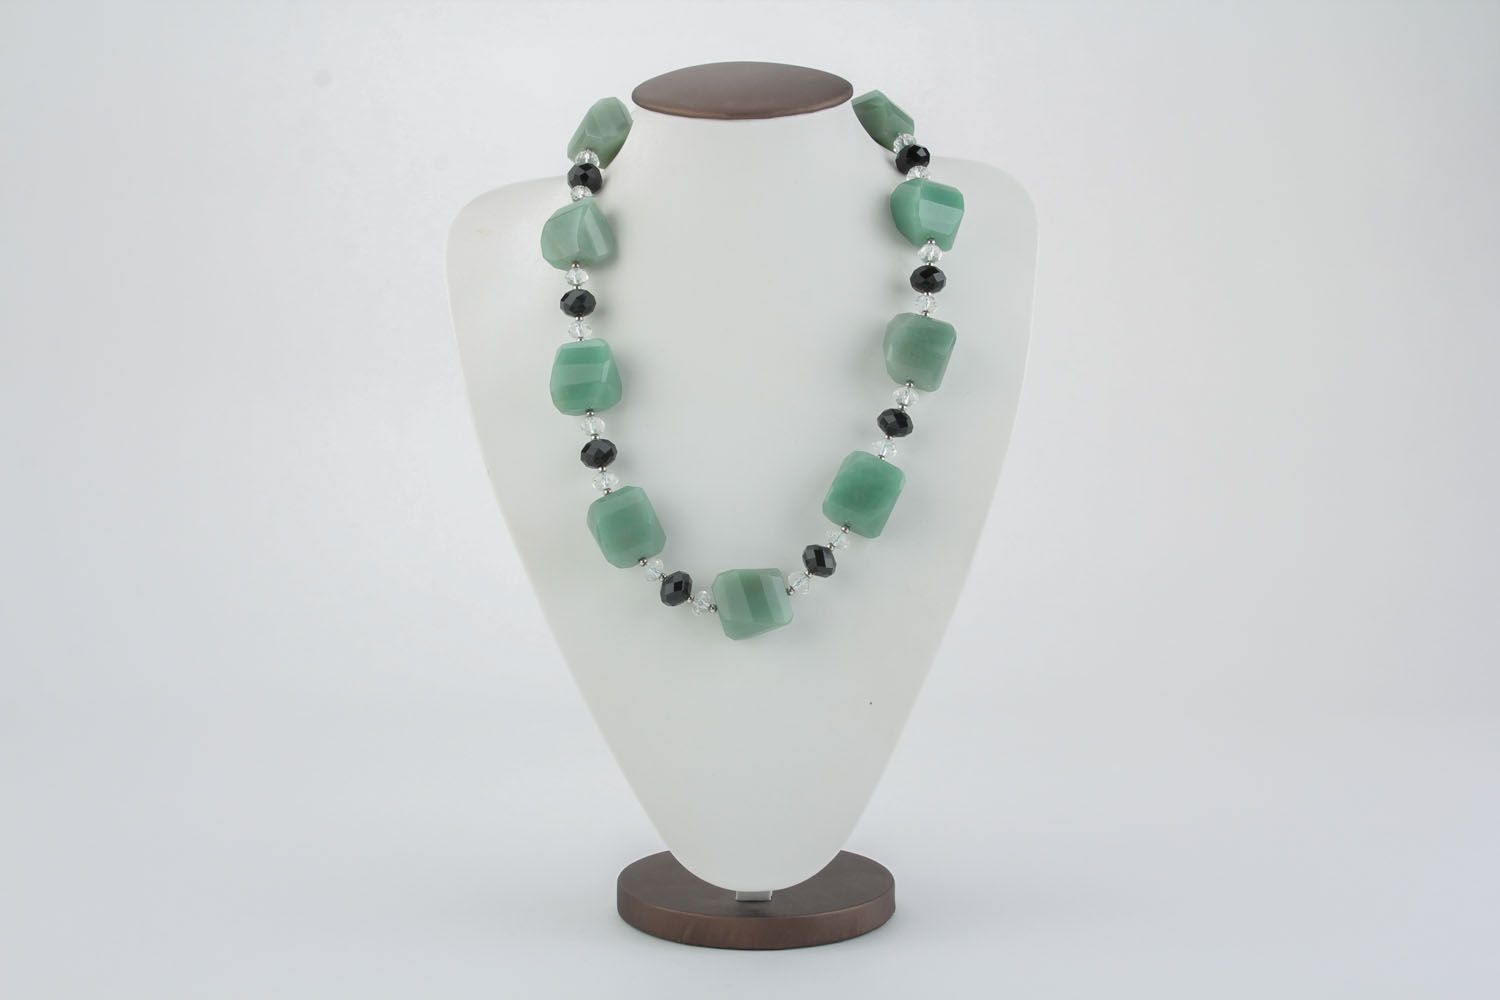 Necklace made of natural stones photo 1